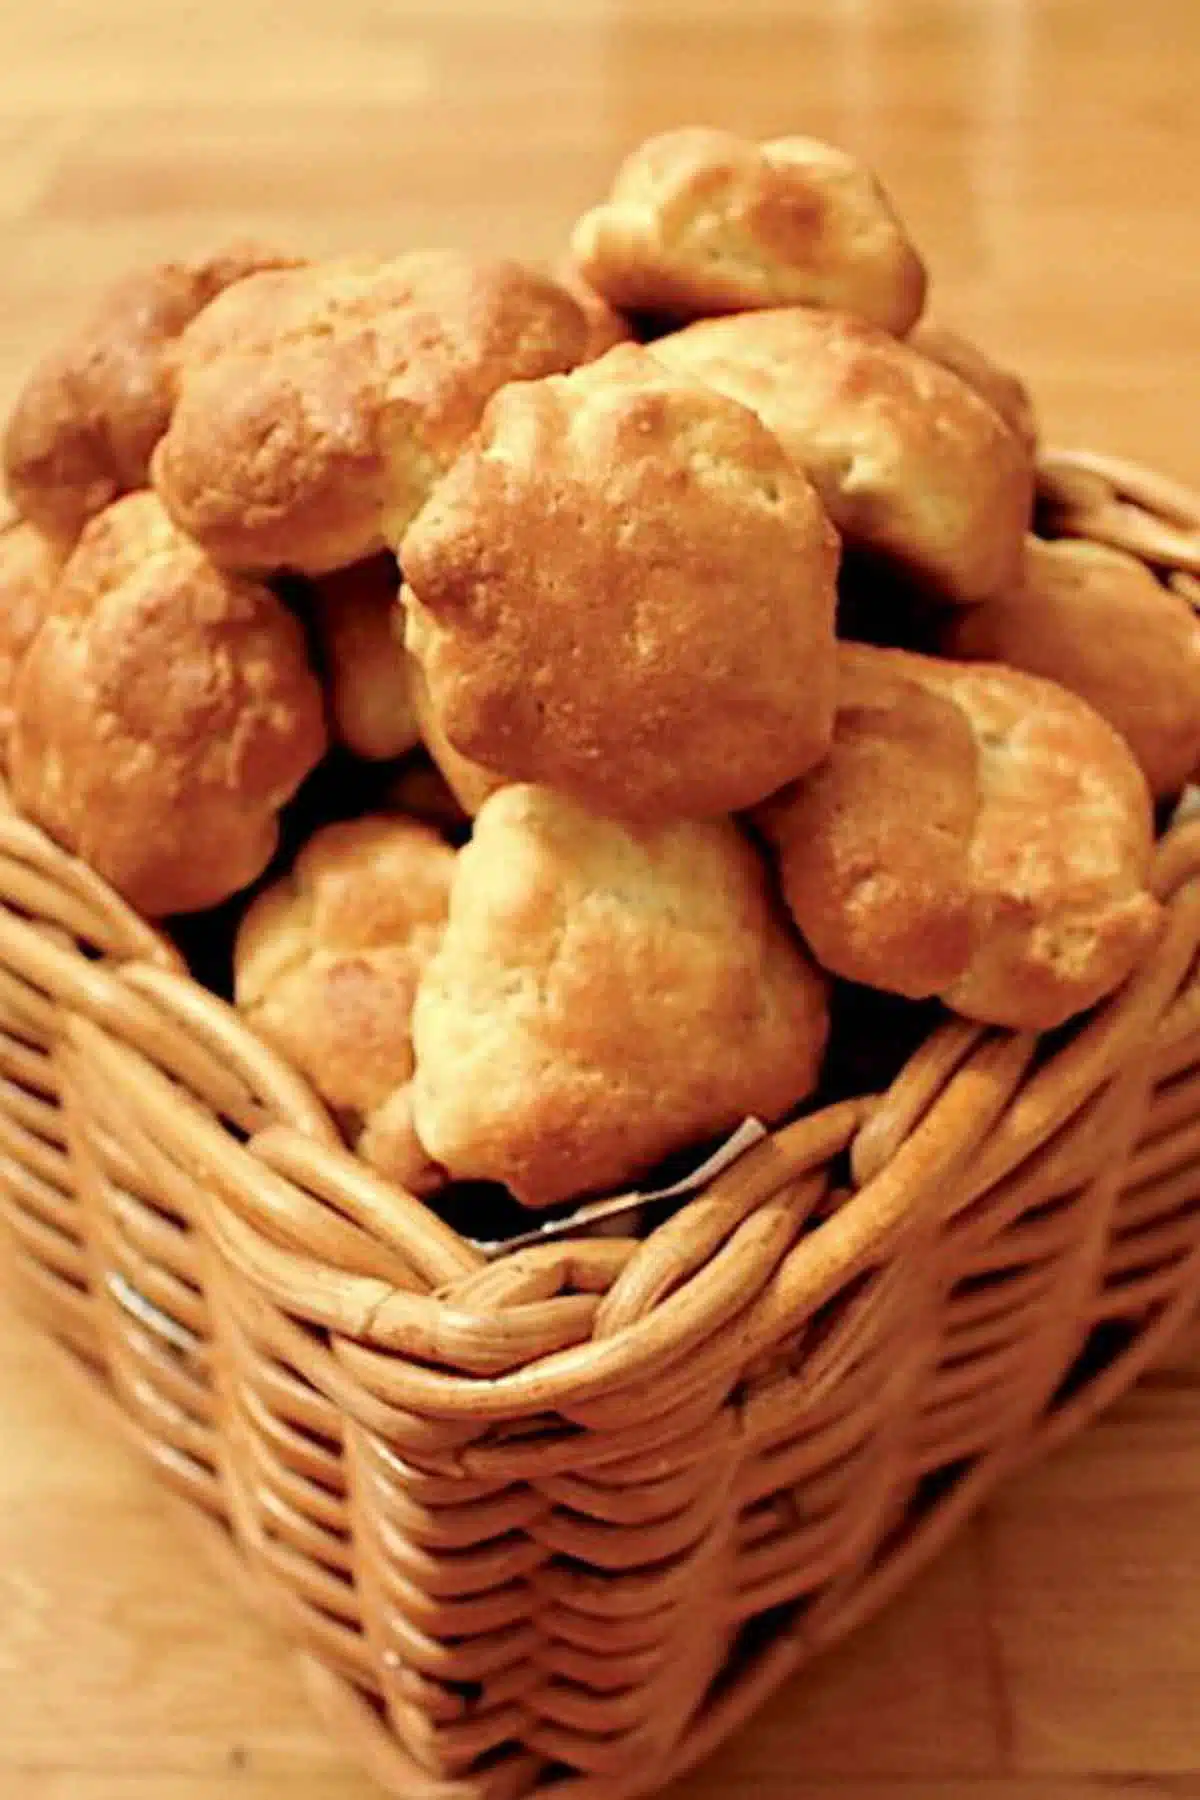 Low Carb Rolls in a wooden basket.